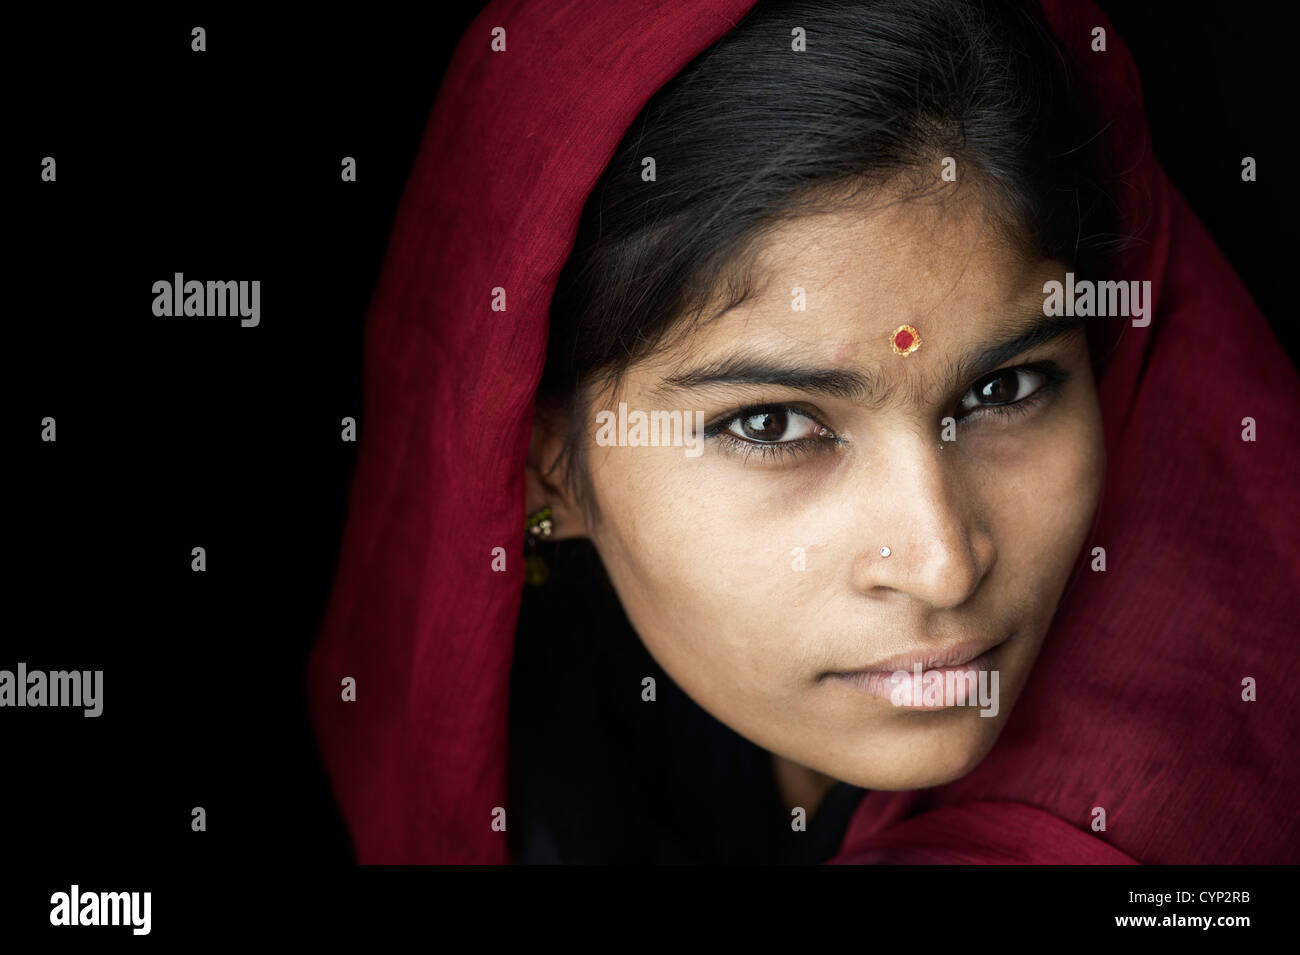 Indian girl wearing a red veil against a black background. Andhra Pradesh, India Stock Photo